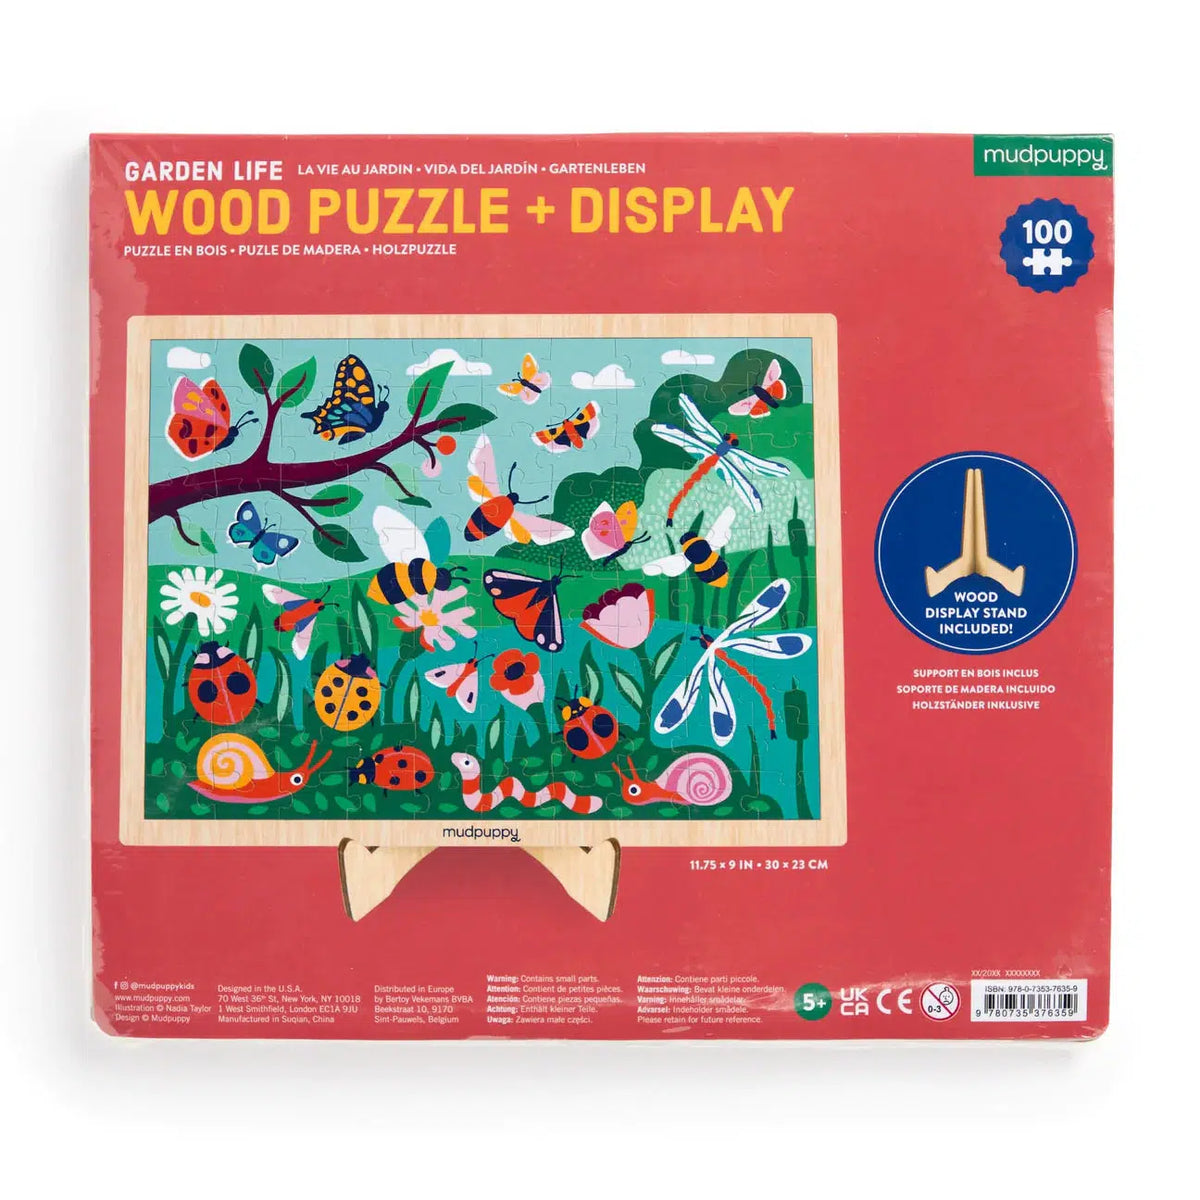 Back view of the packaging on the garden life puzzle.